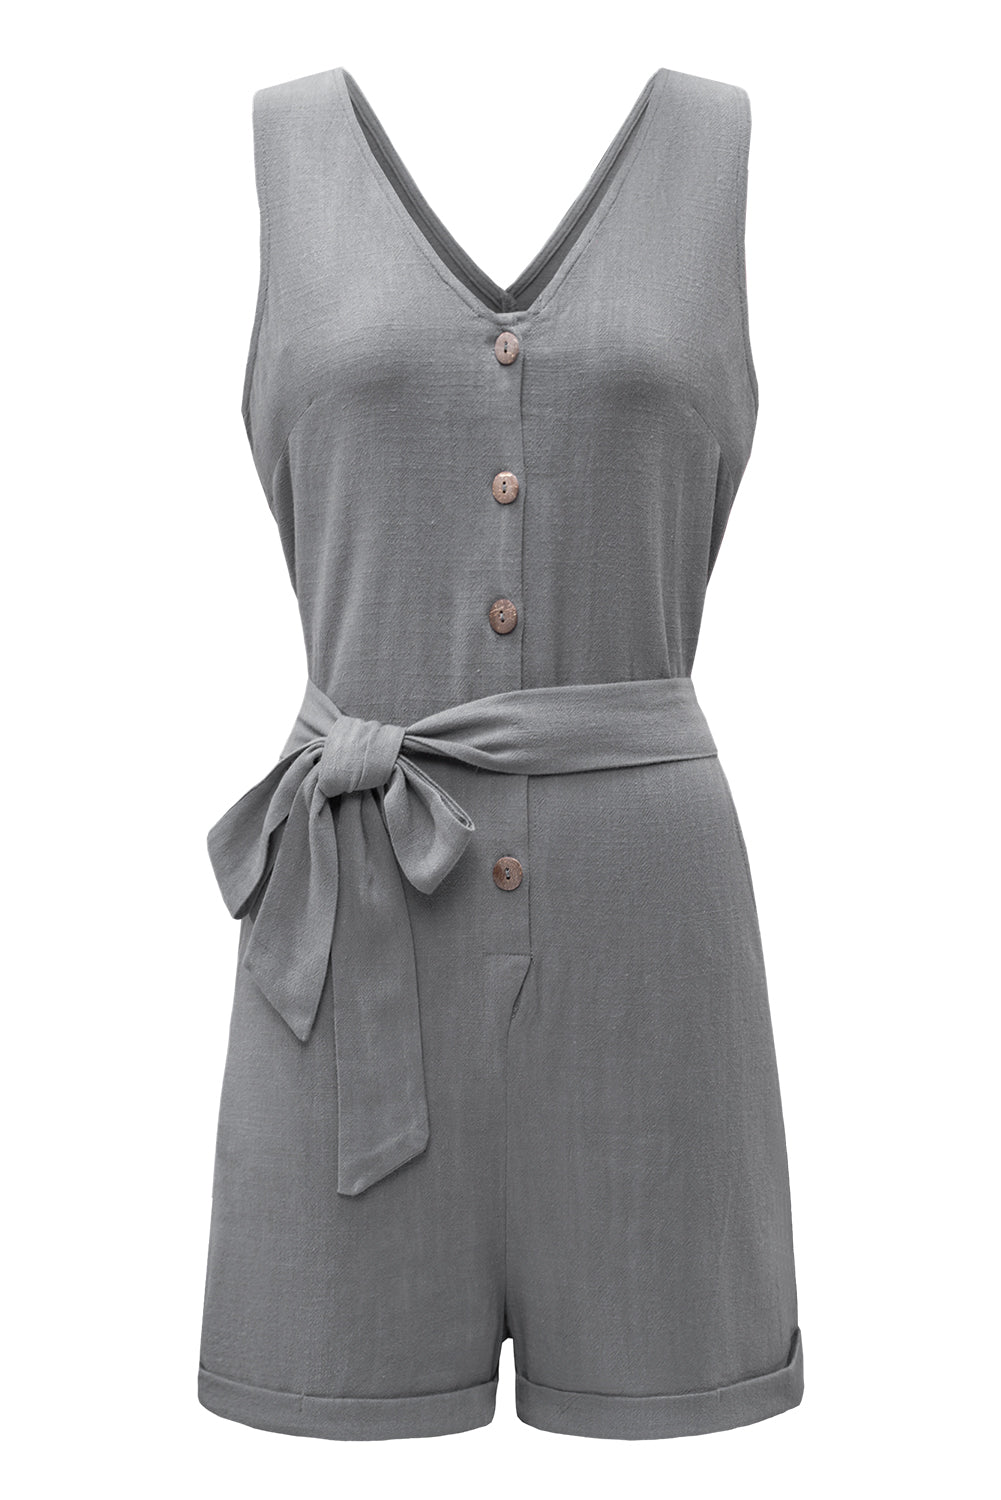 Casual Gray Button V Neck Sleeveless Romper with Belt